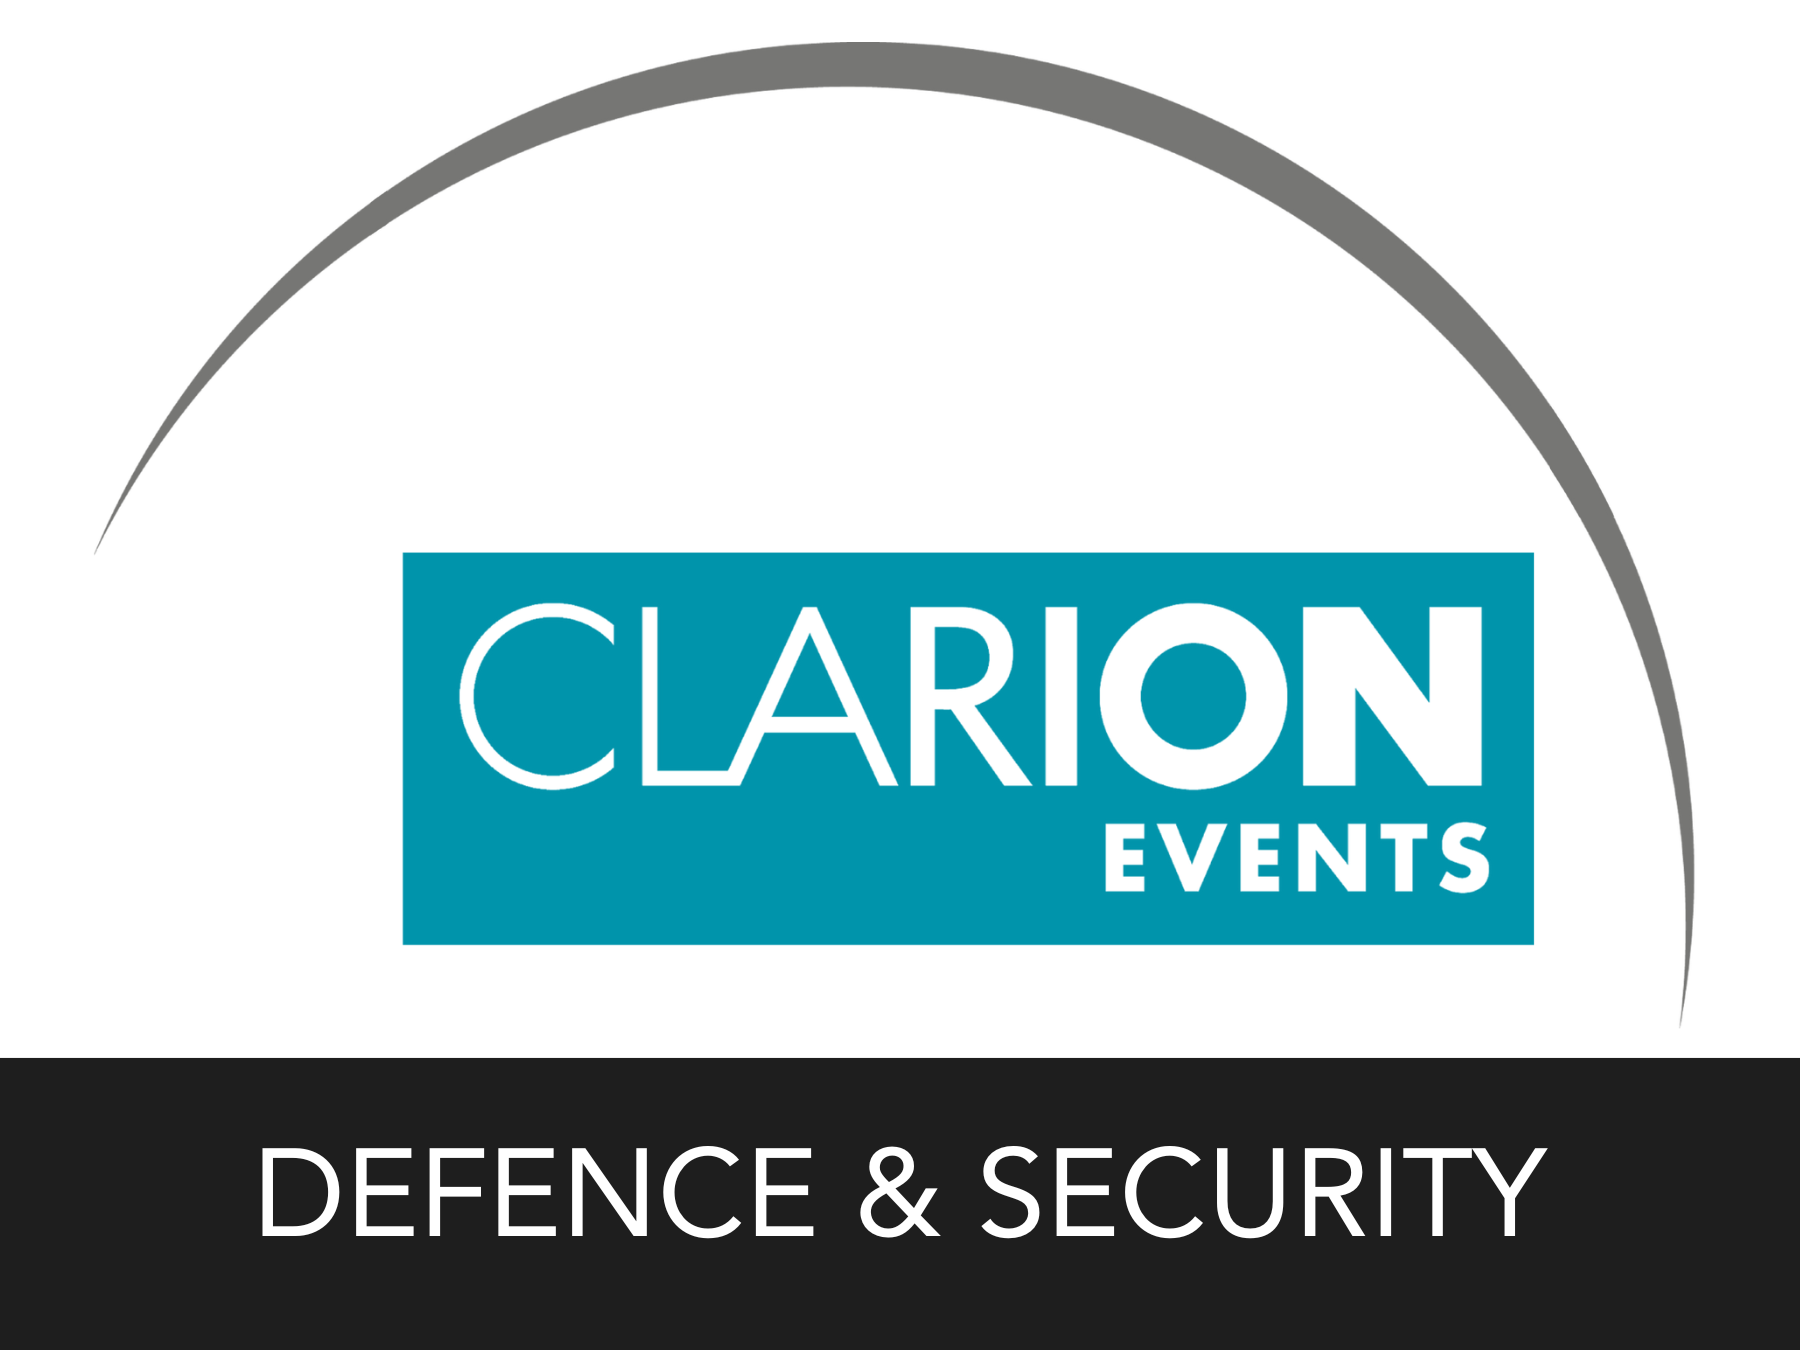 Clarion Events: Defence & Security